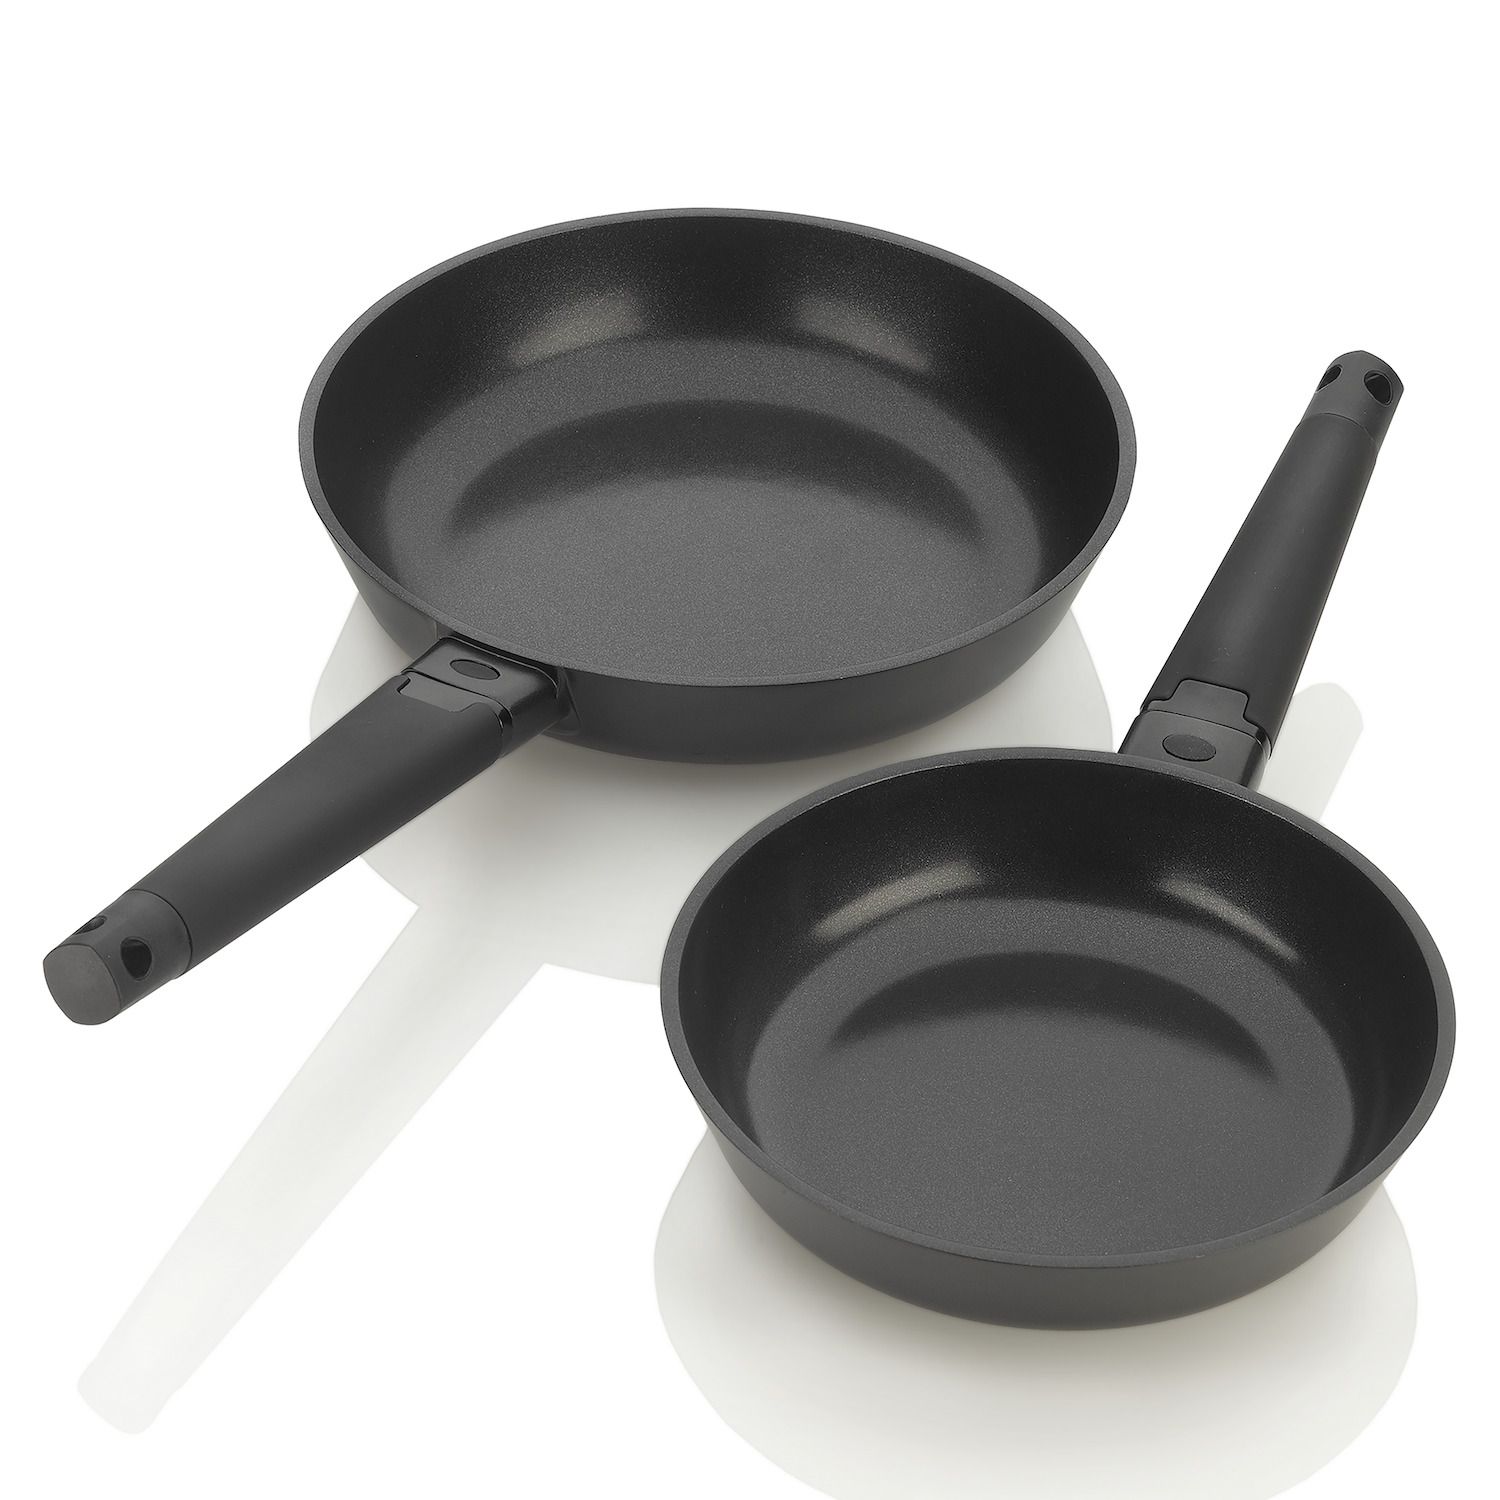 Wolfgang Puck 3-Piece Stainless Steel Skillet Set, Scratch